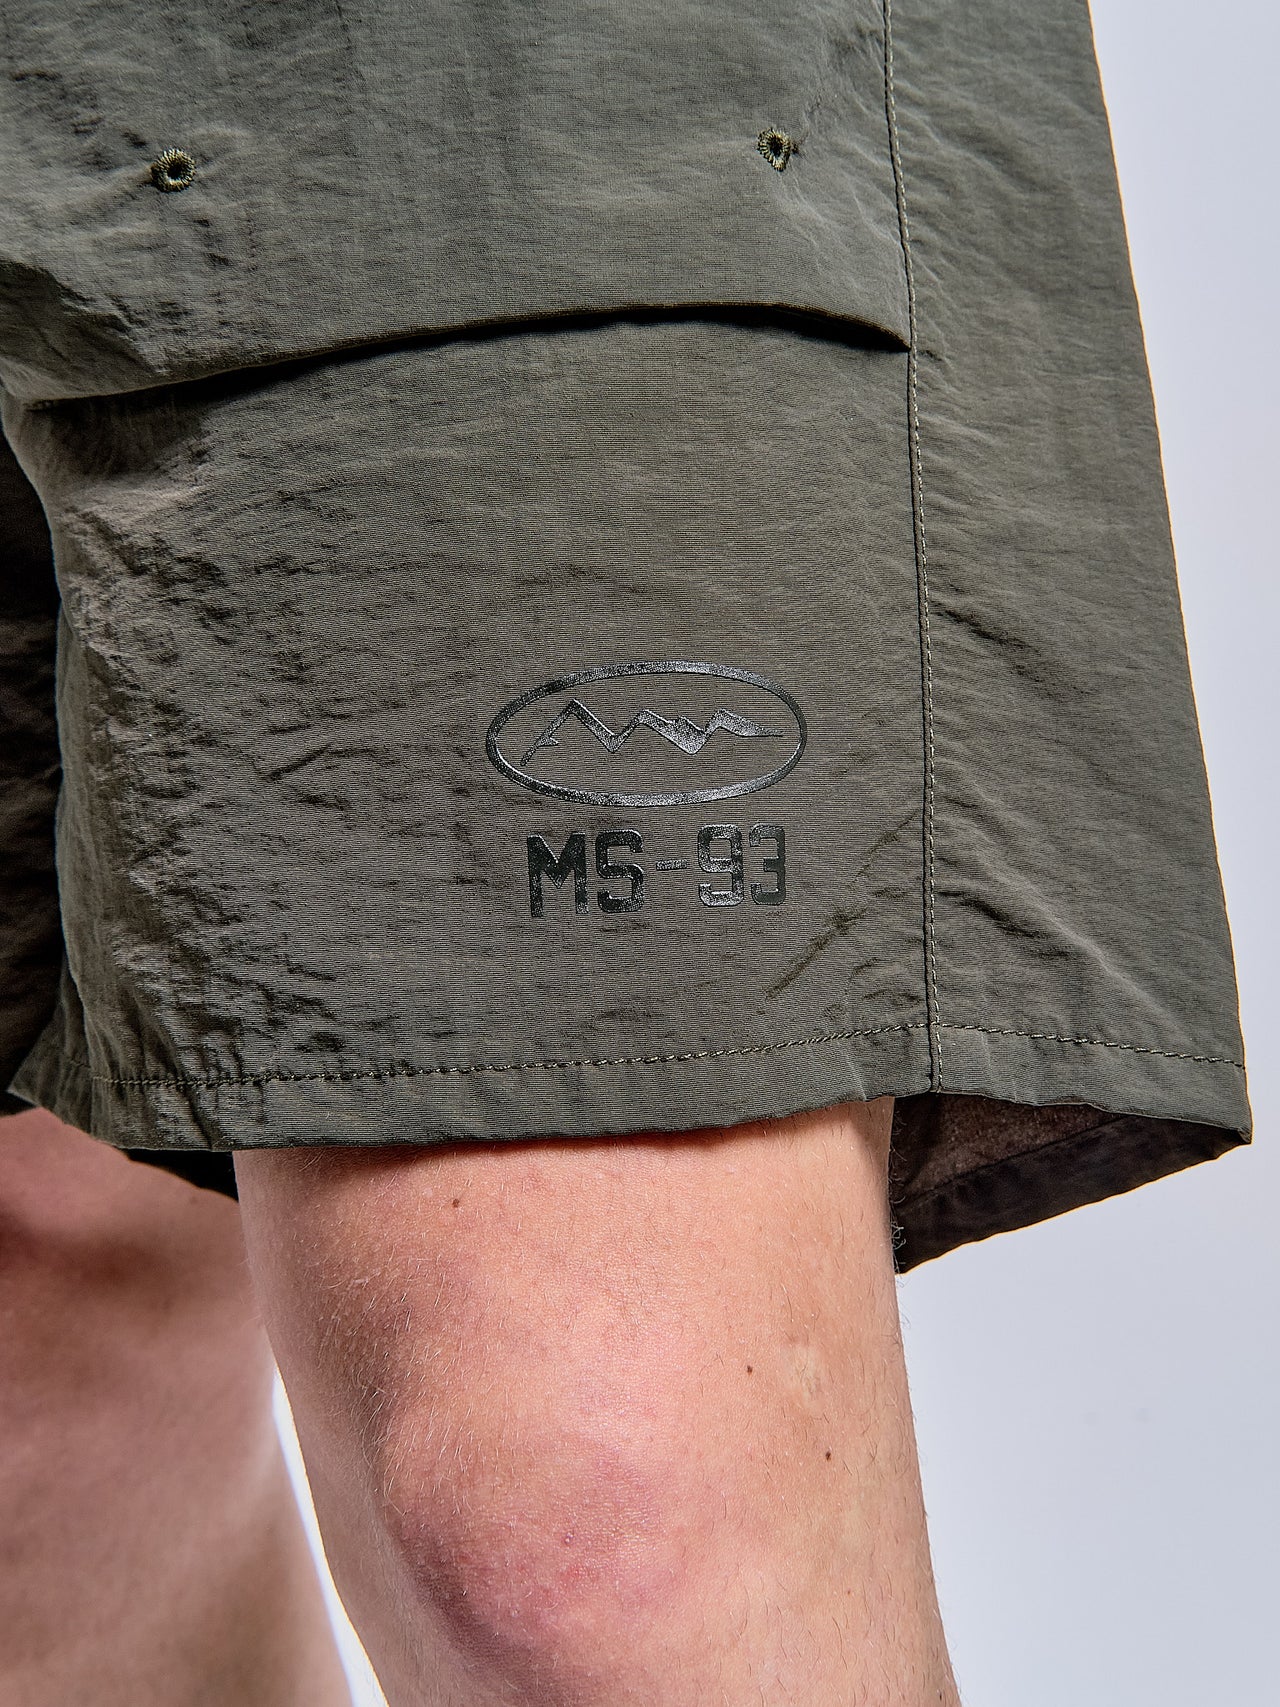 Park Shorts in Olive